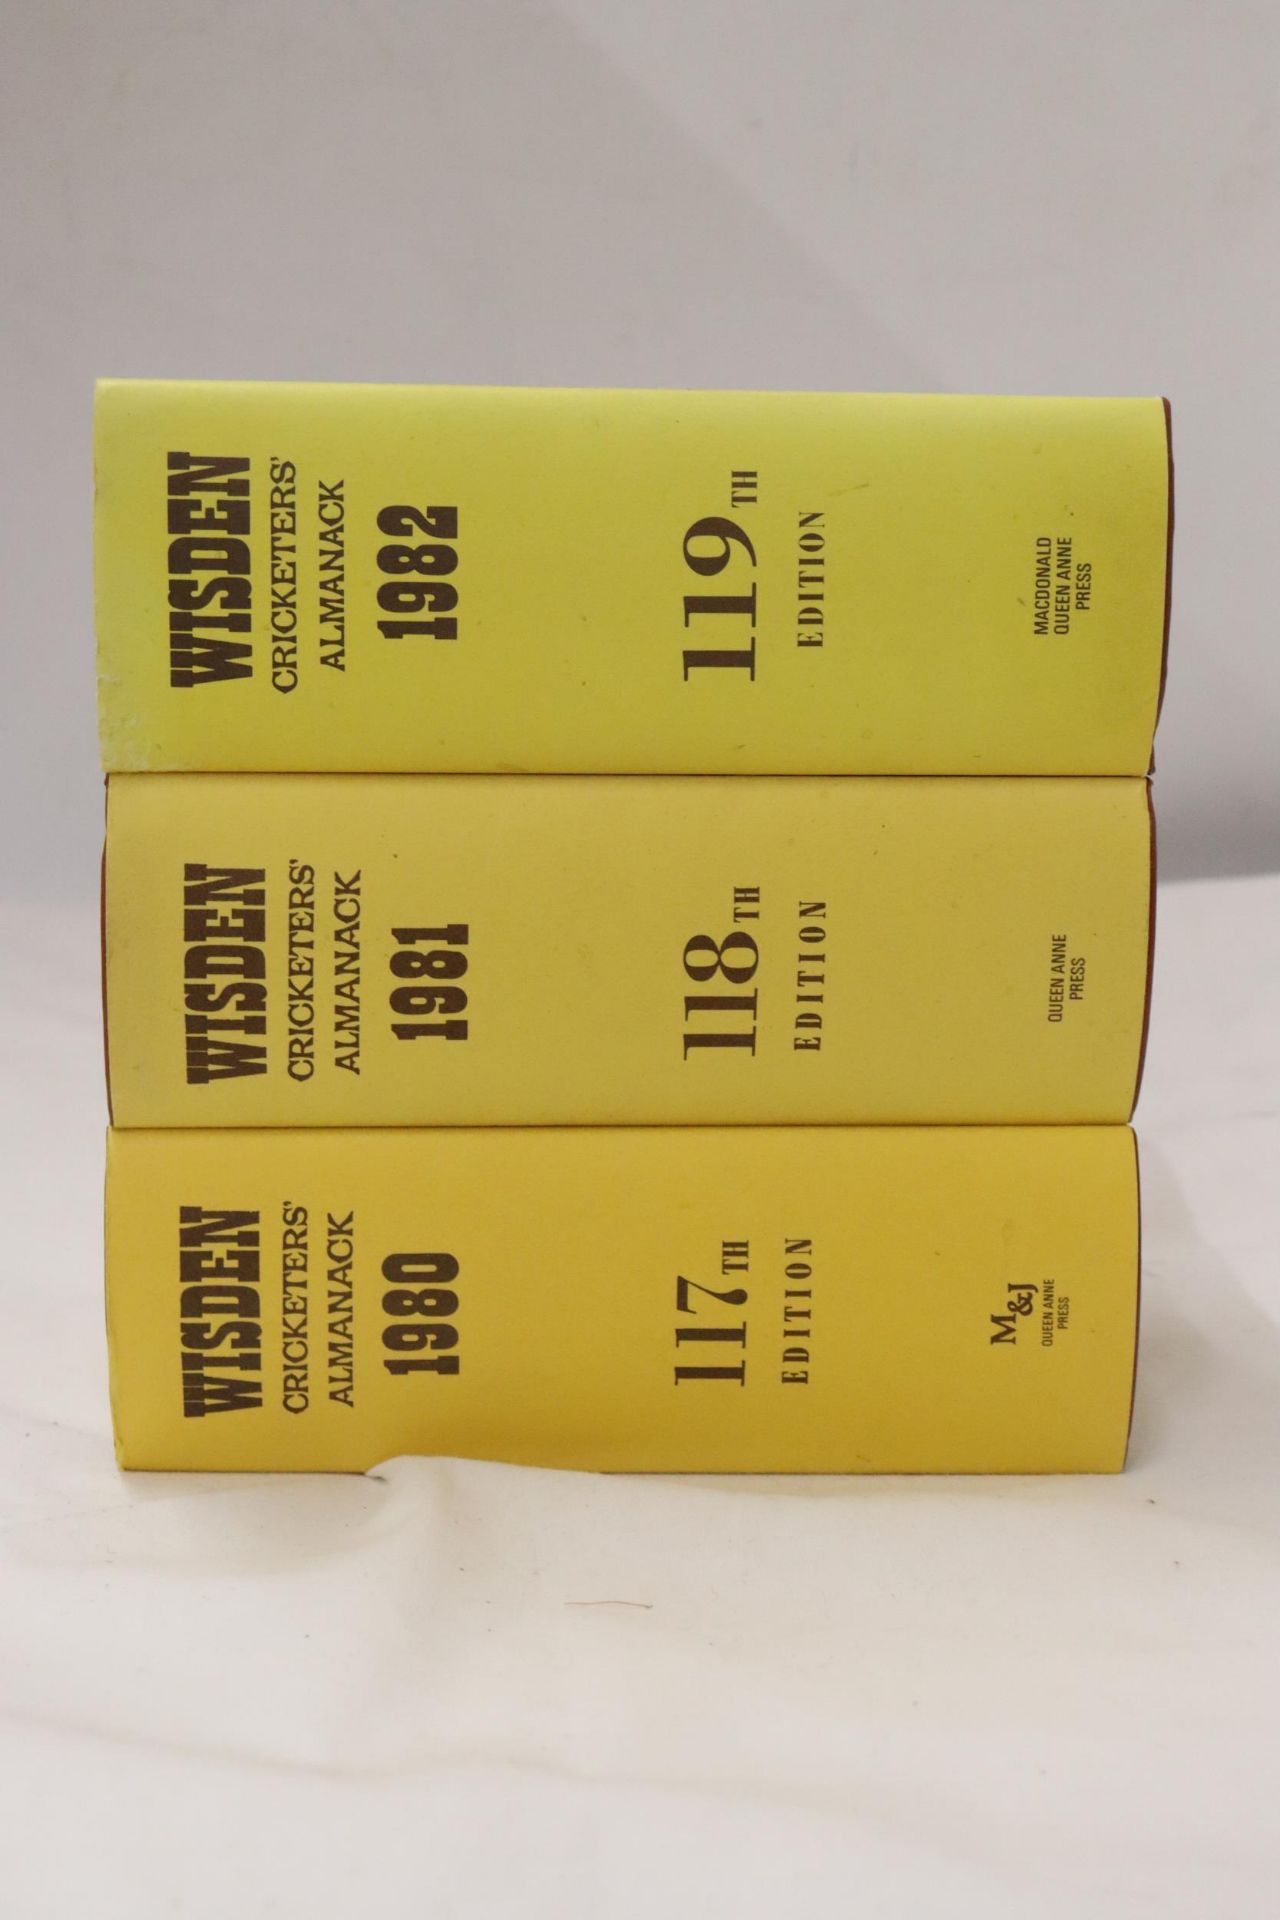 THREE HARDBACK COPIES OF WISDEN'S CRICKETER'S ALMANACKS, 1980, 1981 AND 1982. THESE COPIES ARE IN - Image 2 of 3